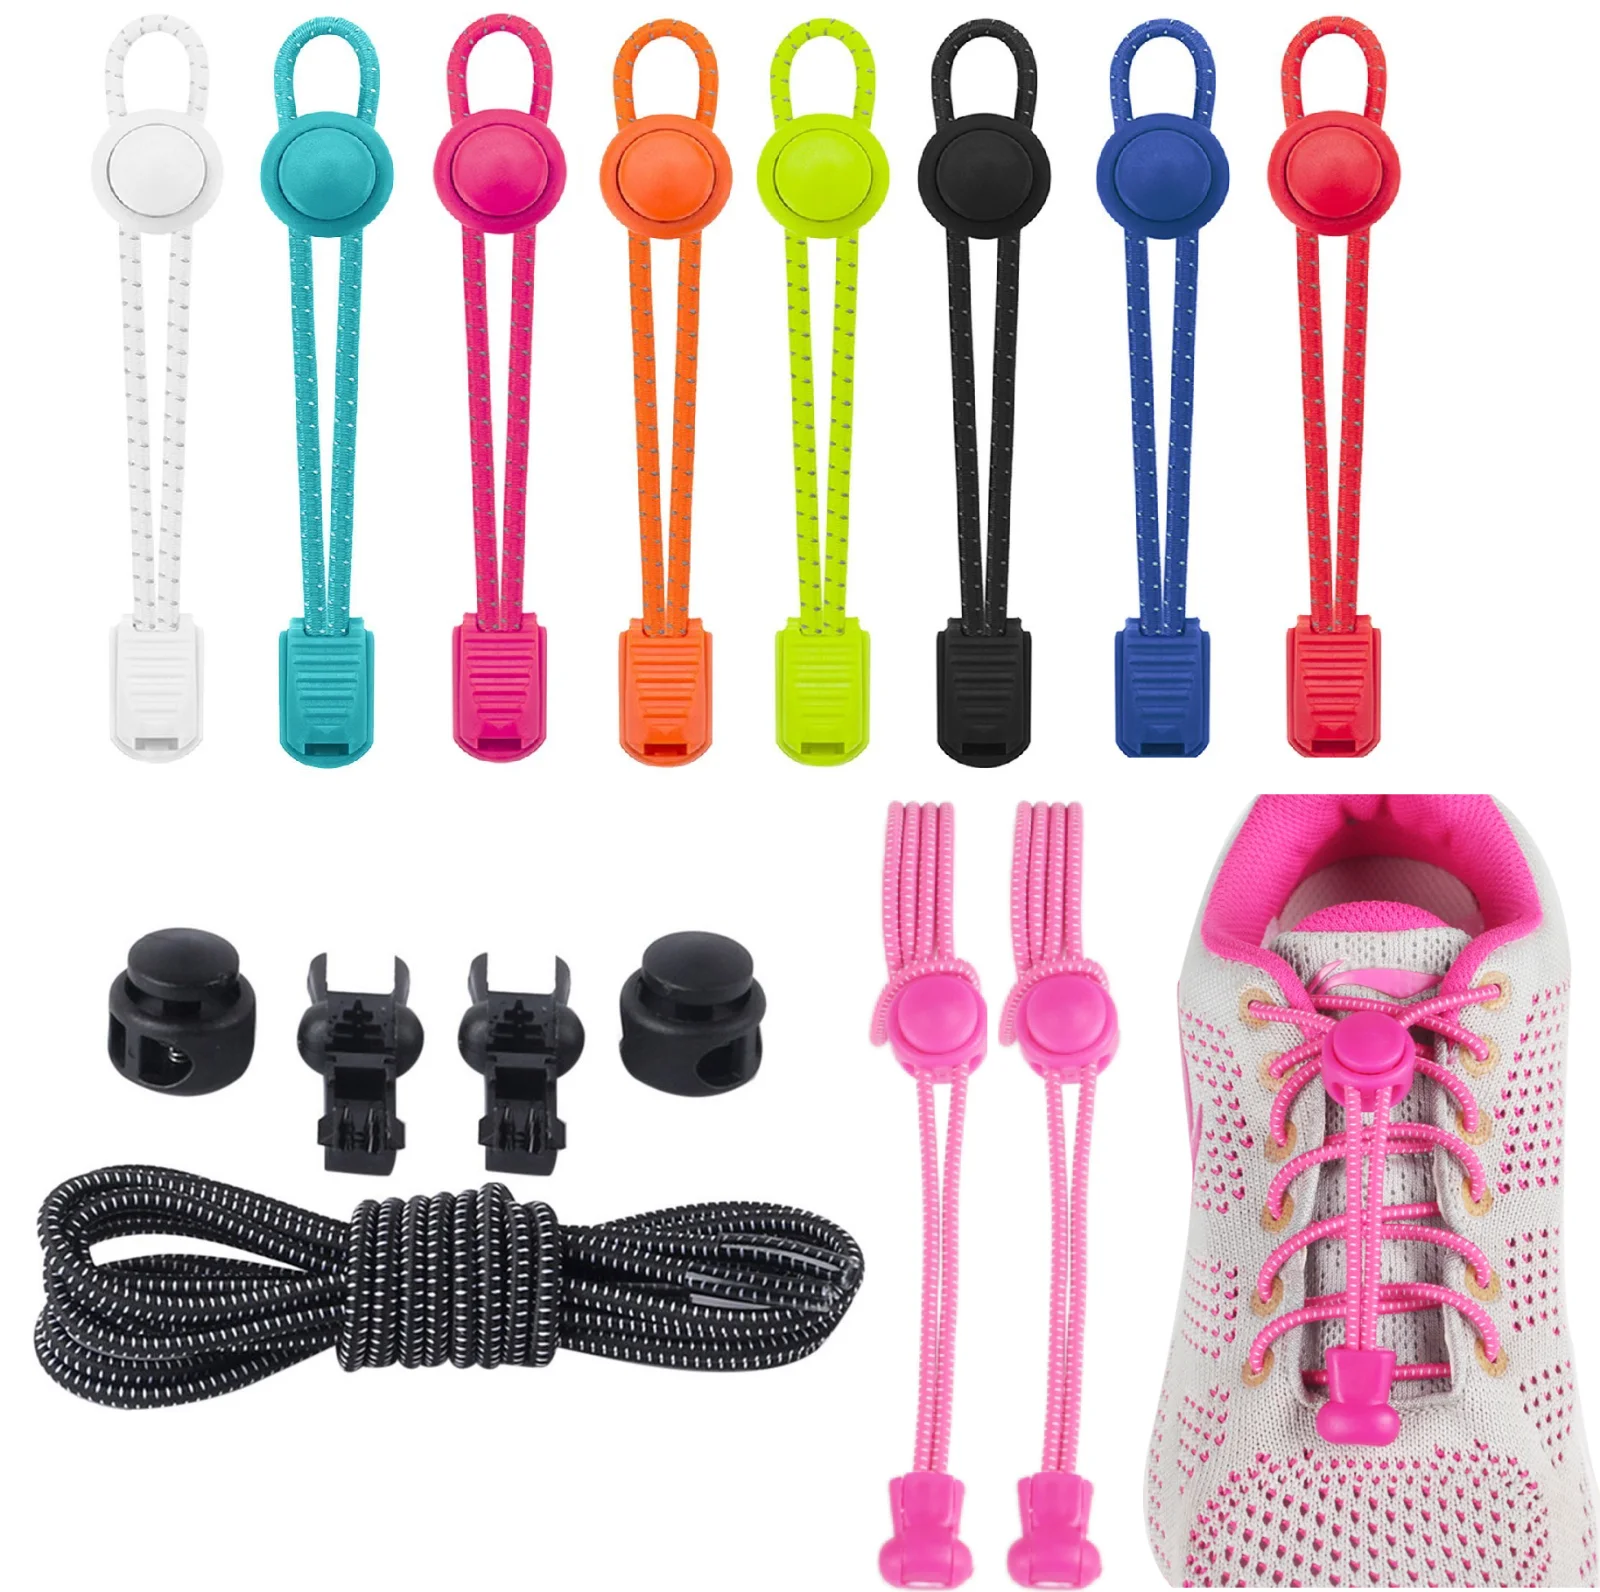 Elastic No Tie Shoe Laces System Lock Sports Shoelaces Runners Trainer Lock Lace 